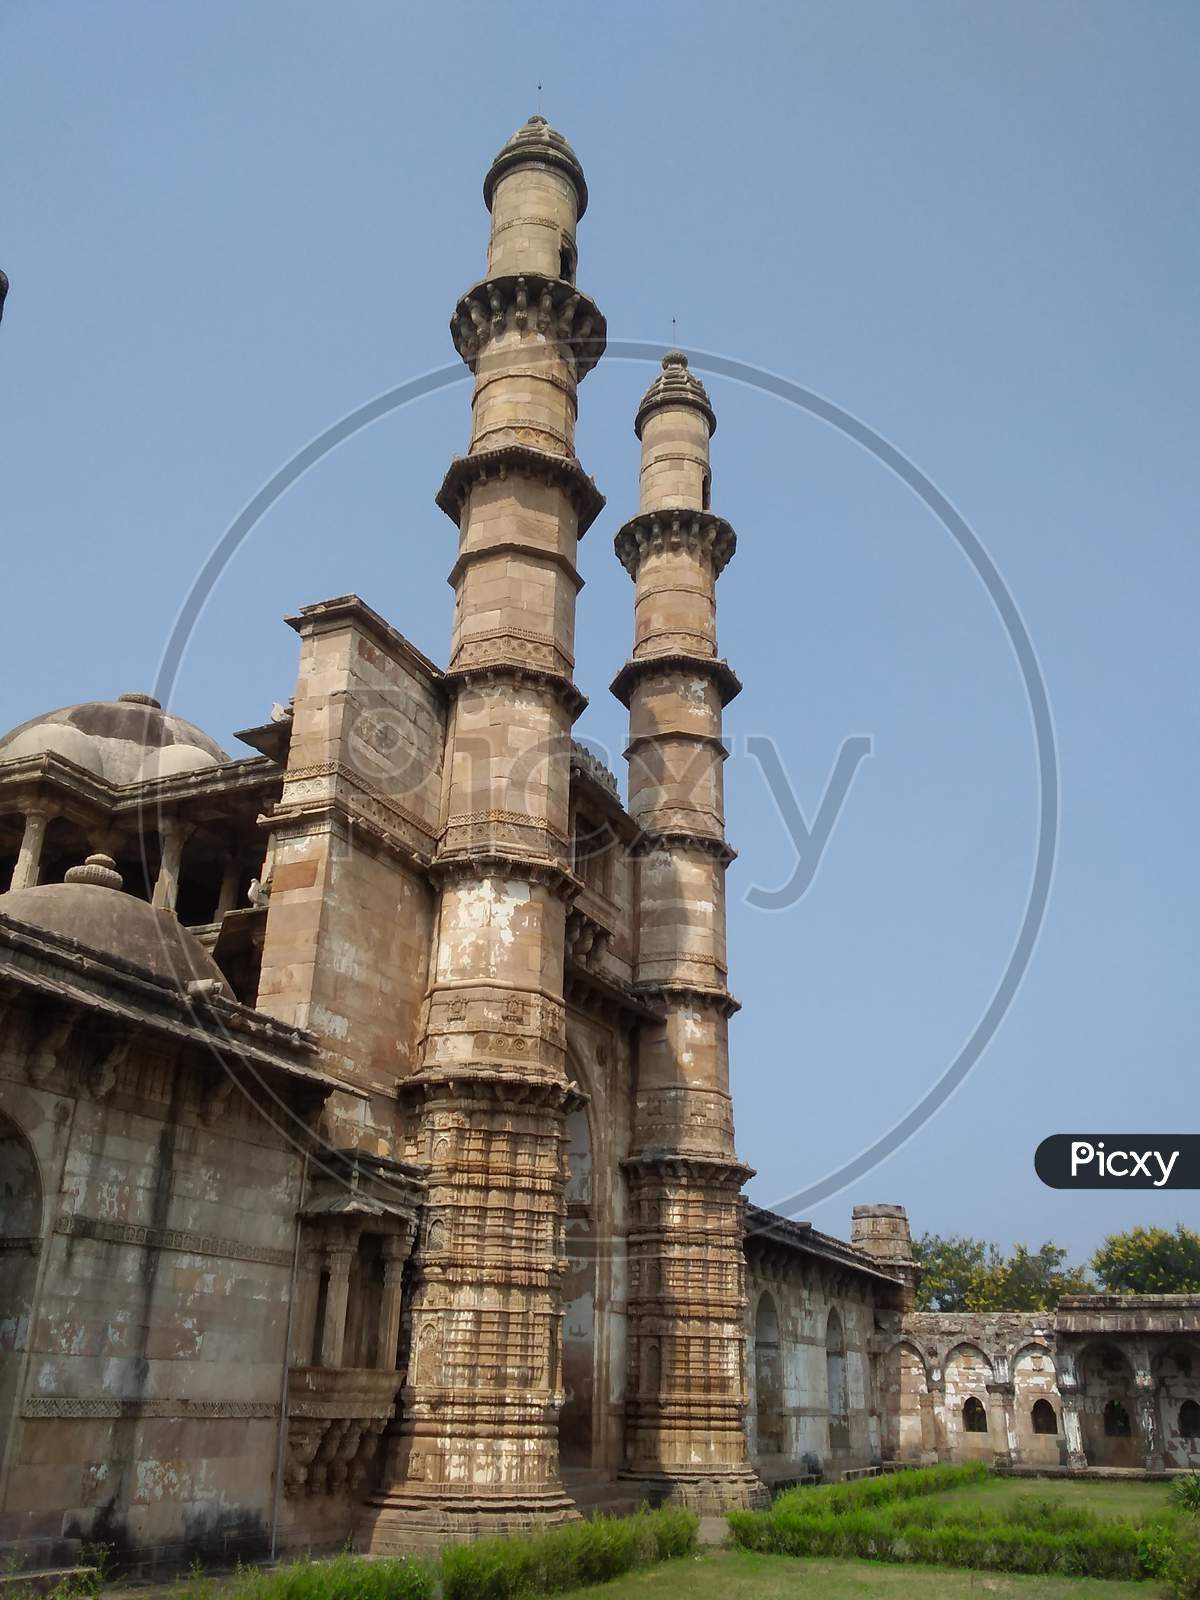 Jami masjid at Champaner-Pavagadh Archaeological Park. A UNESCO world heritage site in Gujarat, India